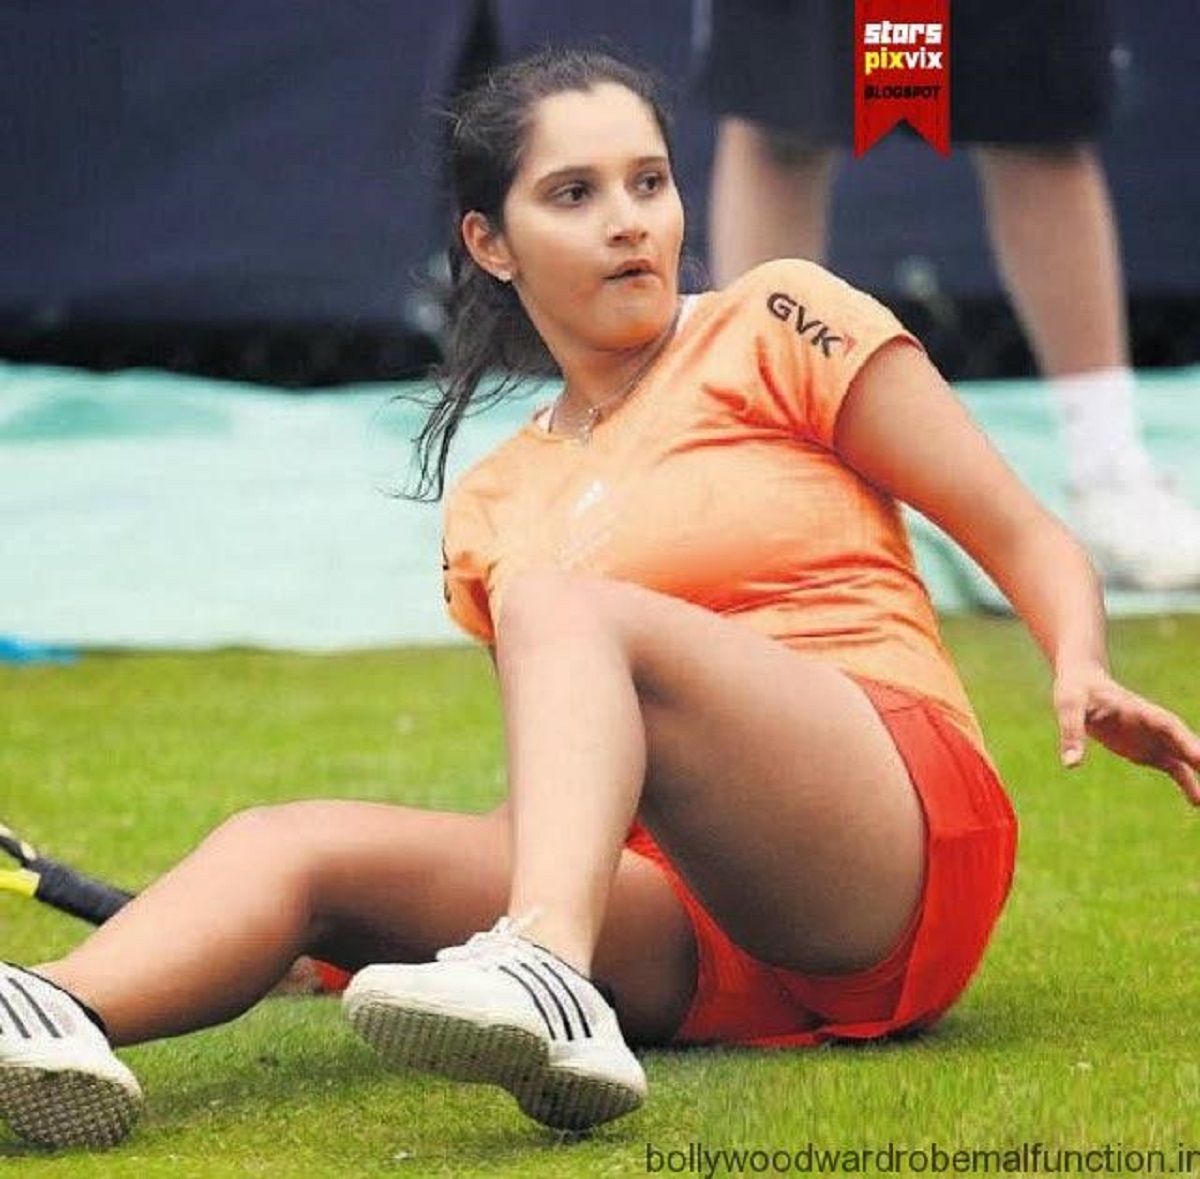 Anam Mirza Nude - Sania Mirza Oops Moments On Tennis Court